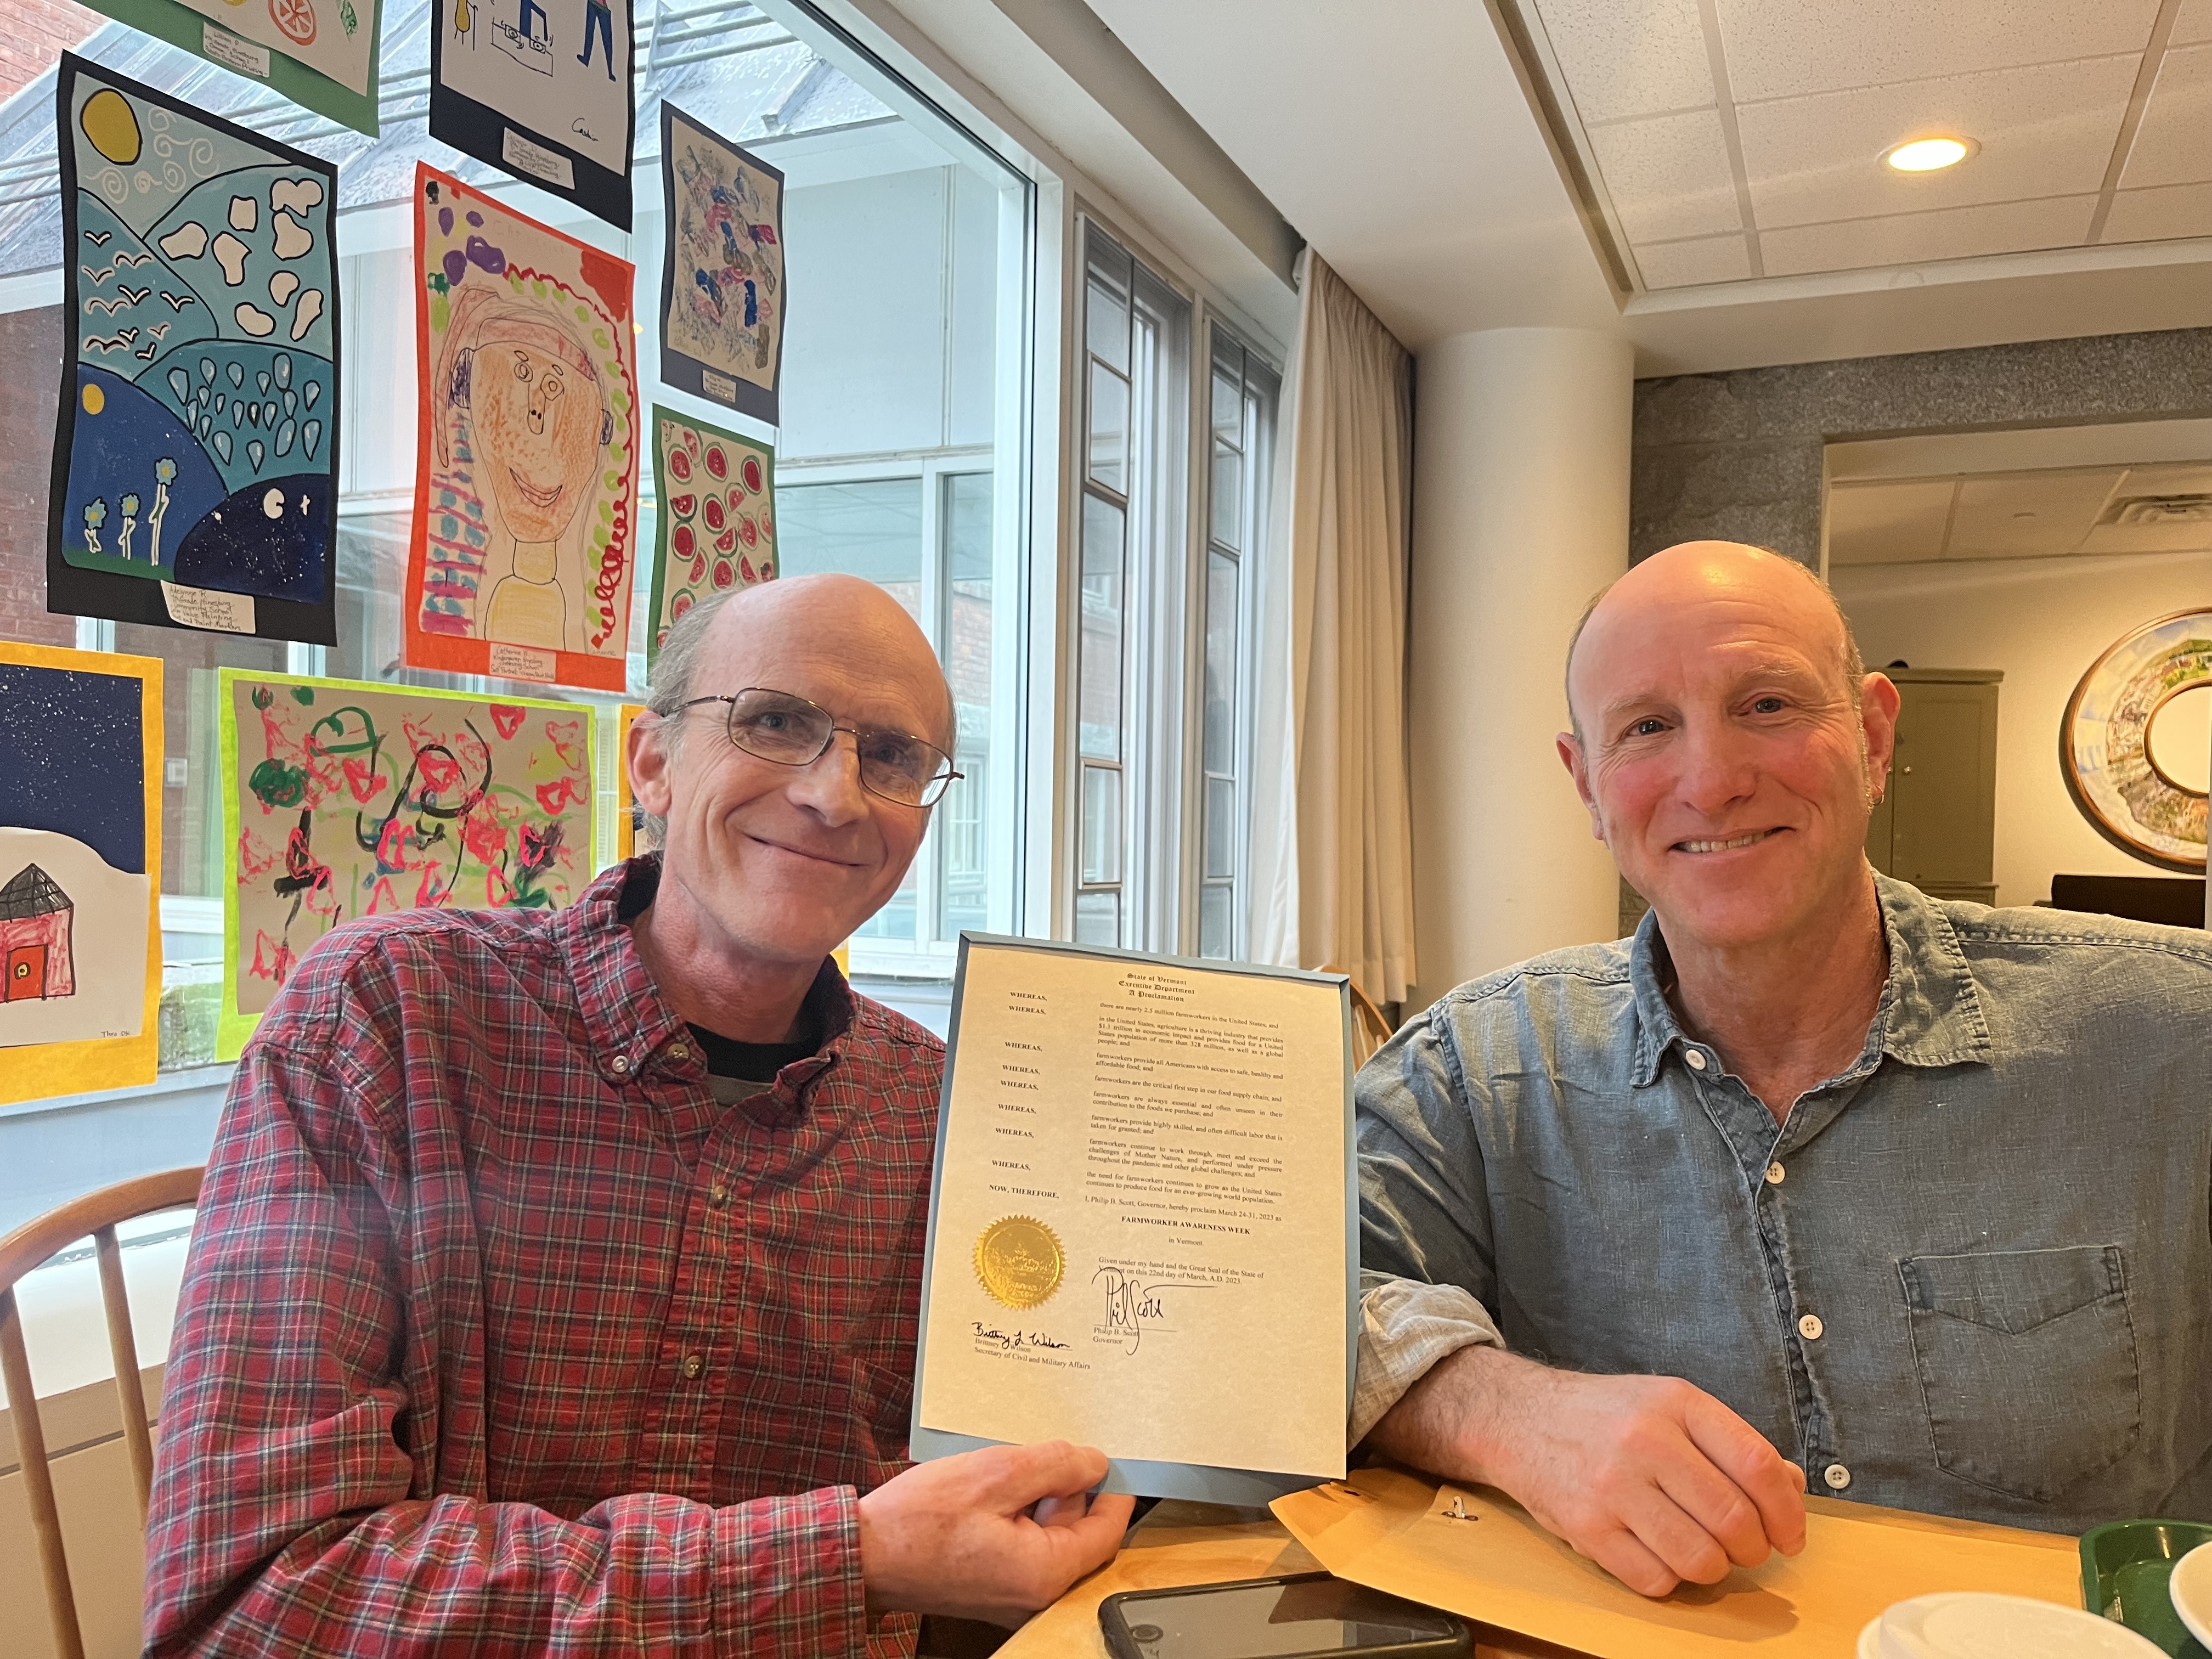 Buster Caswell and Dan Baker, in the state house cafeteria, holding a copy of Governor Scott's Farm Worker Awareness Week proclamation